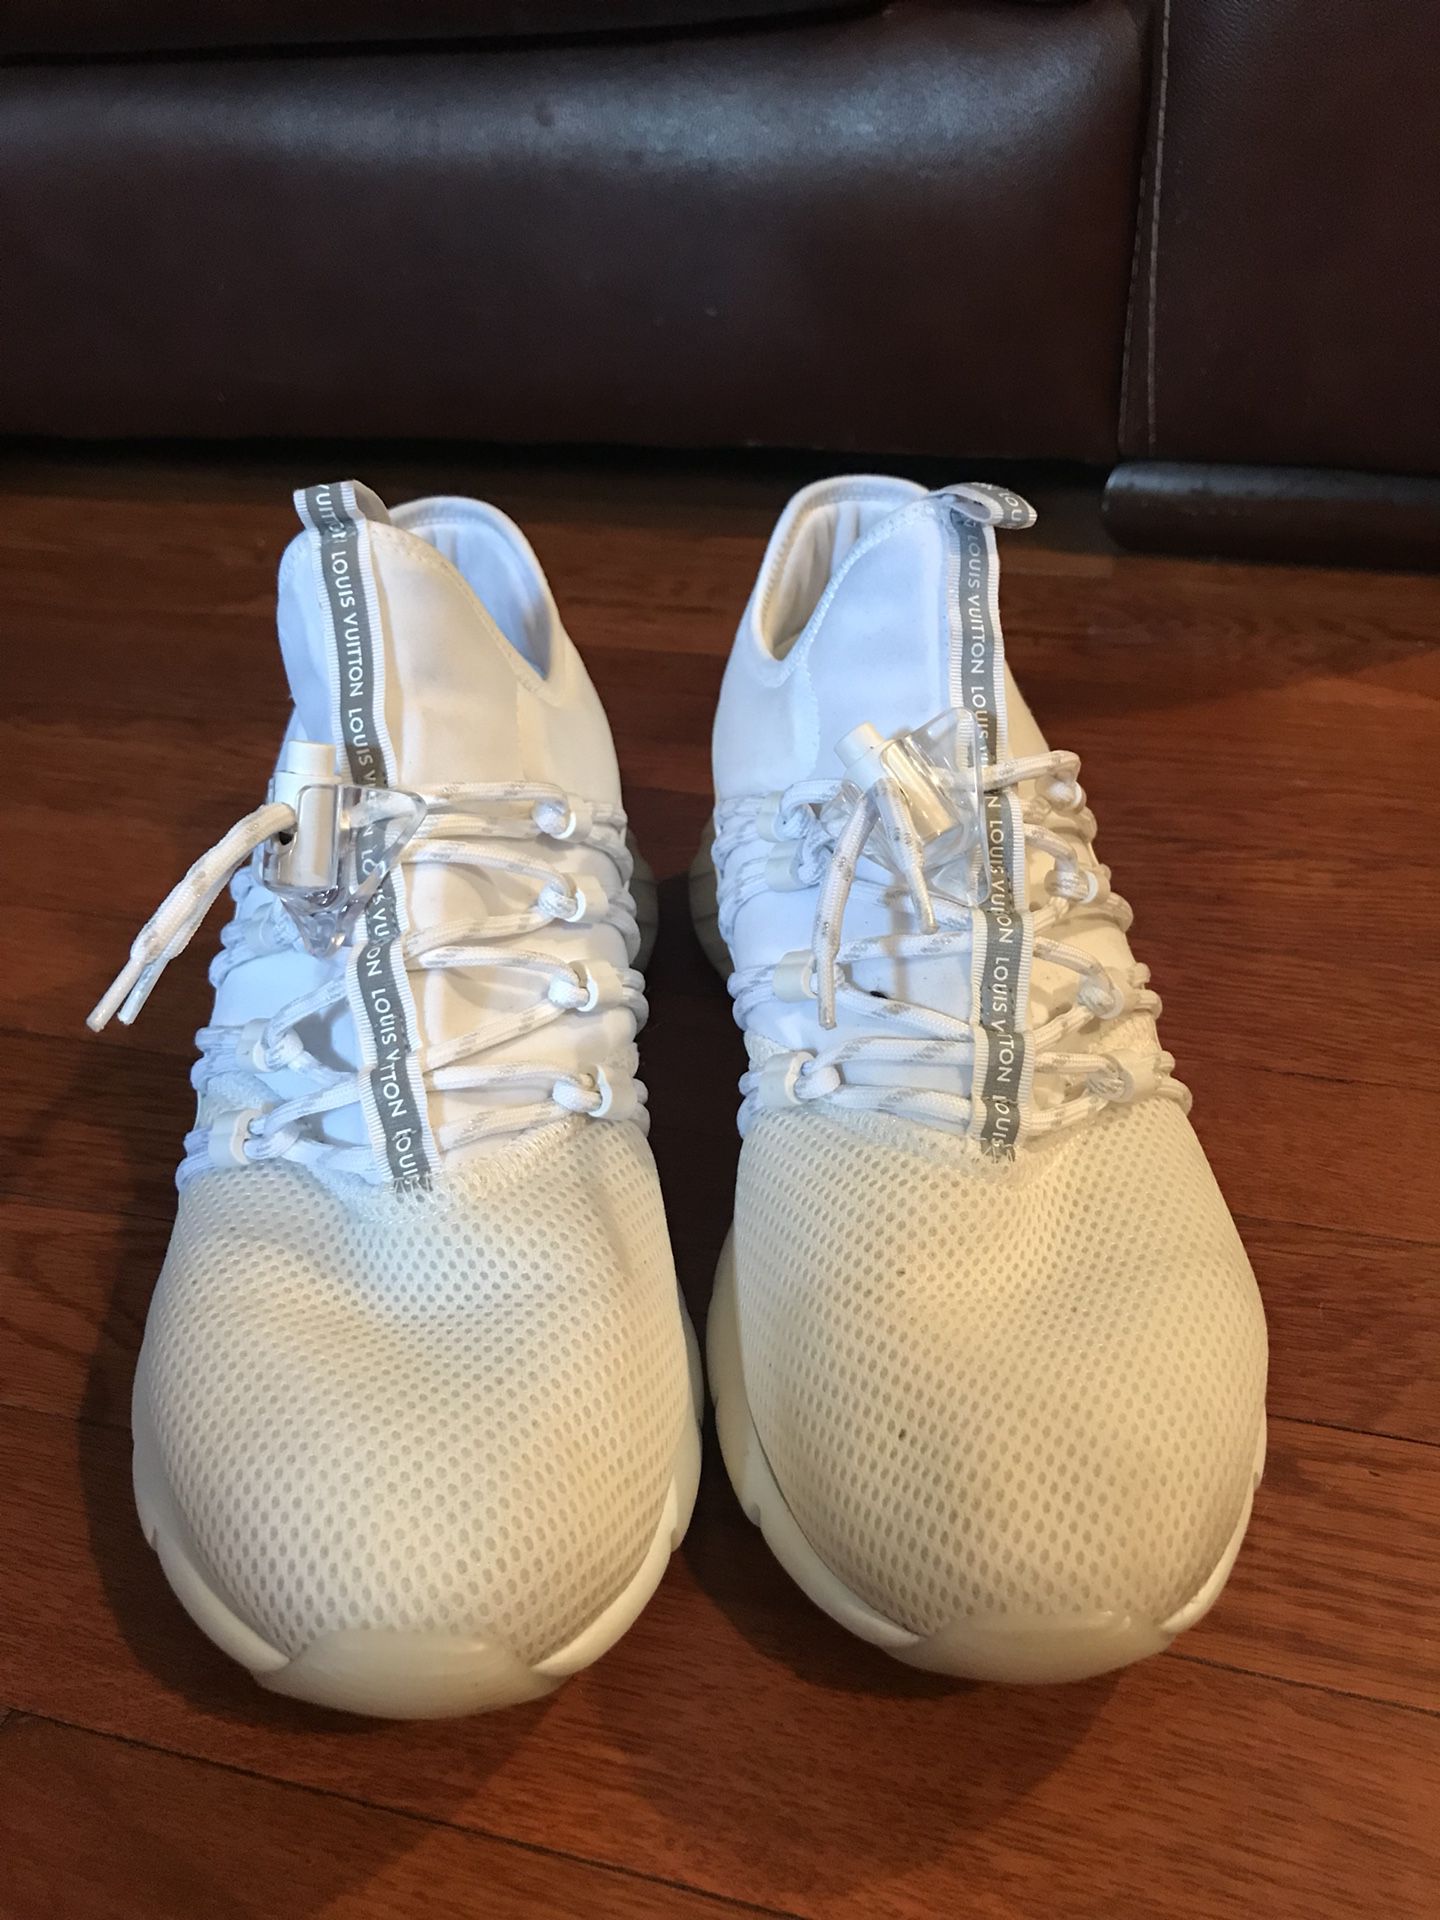 Louis Vuitton Fastlane Sneakers Size 8.5 for Sale in Chicago, IL - OfferUp